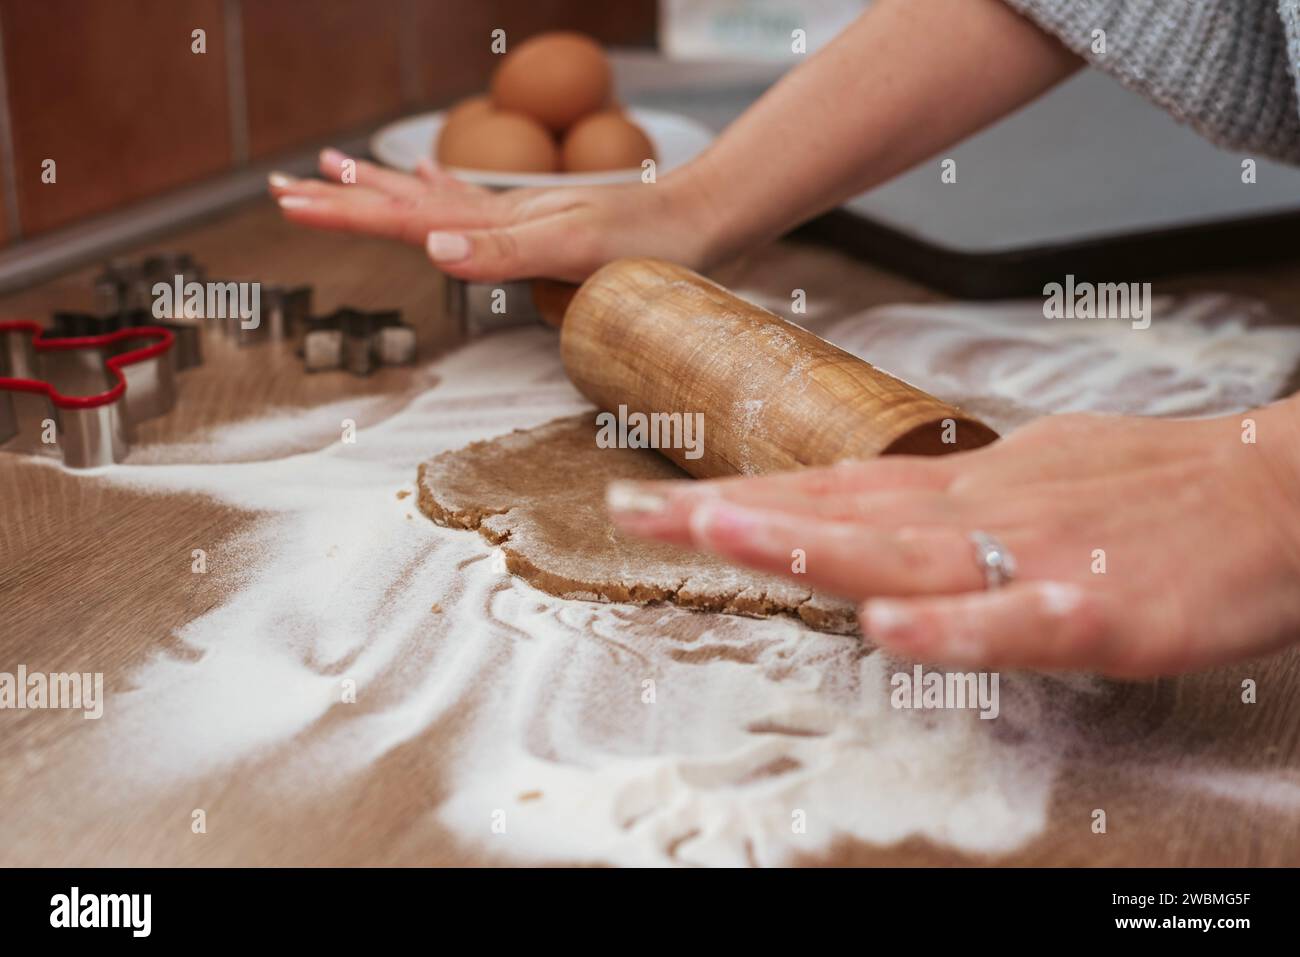 A female baker is carefully preparing dough for a recipe using a wooden spoon and two eggs on a kitchen countertop Stock Photo